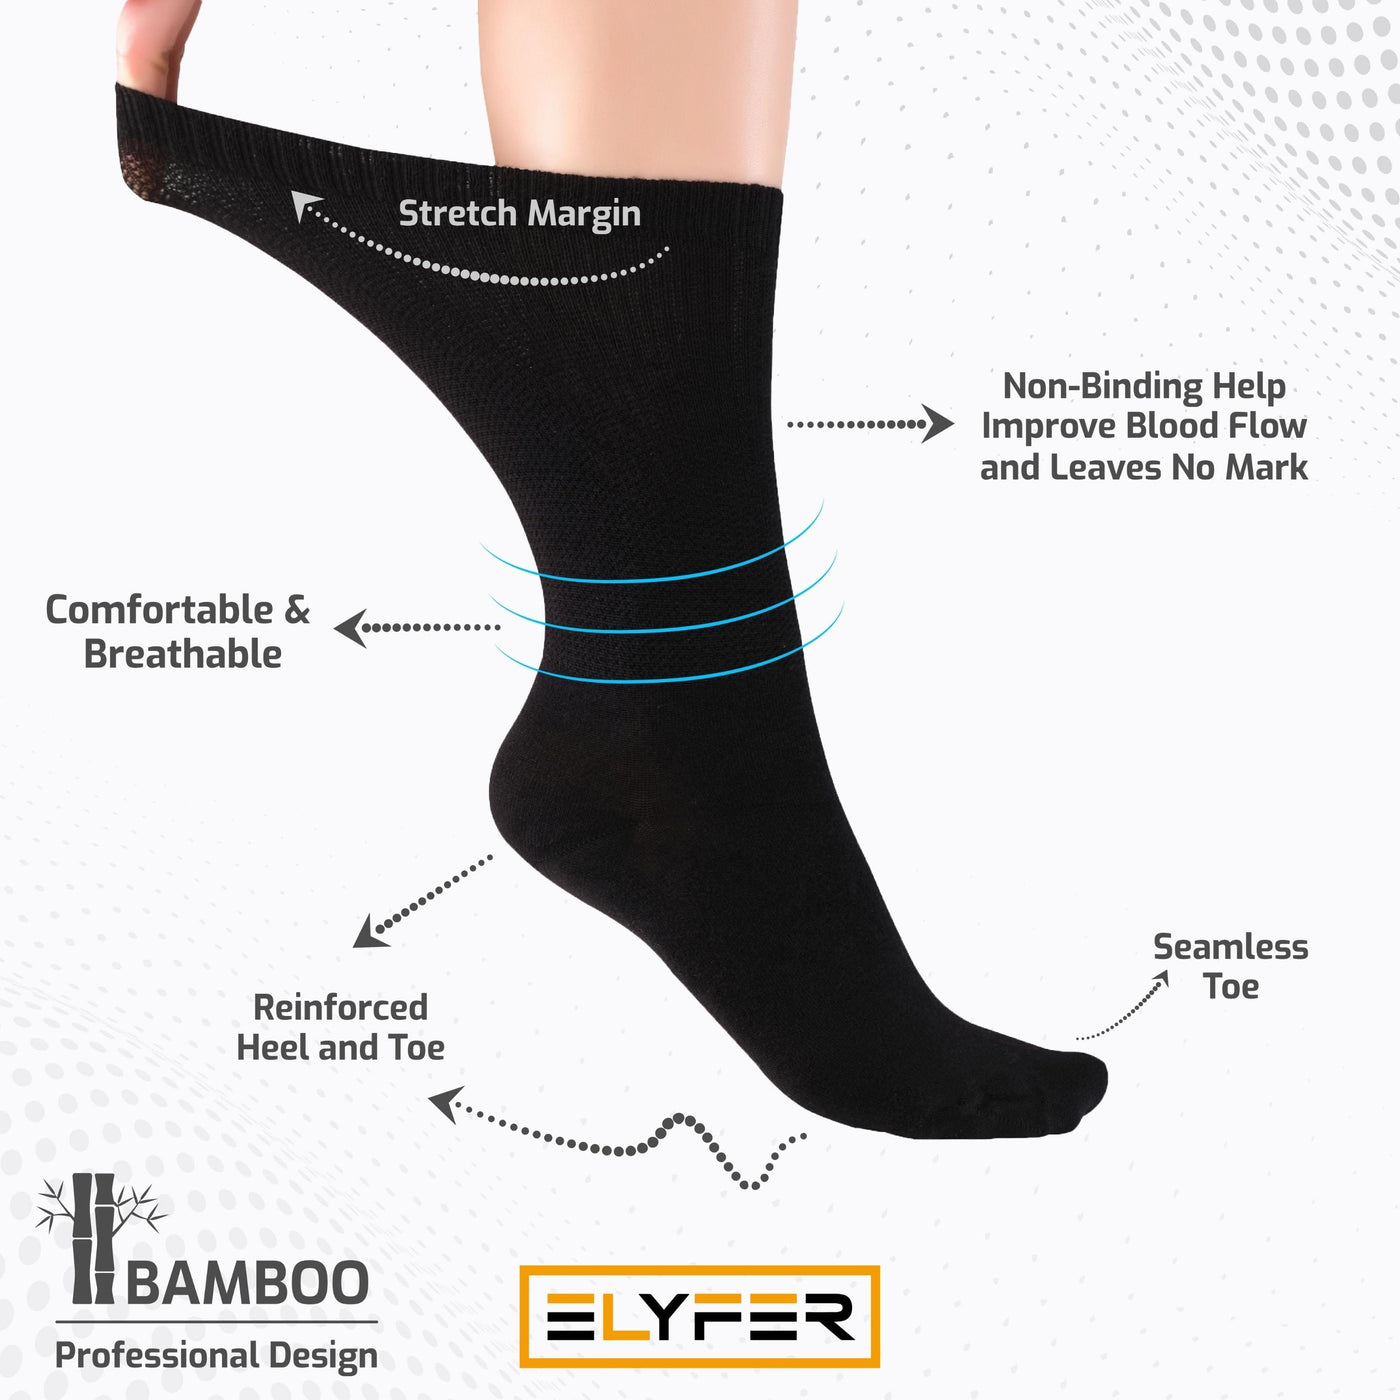 Women's Thin Bamboo Dress Socks Seamless Toe - Above Ankle - Soft - Durable - Breathable 8 Pairs #color_black-beige